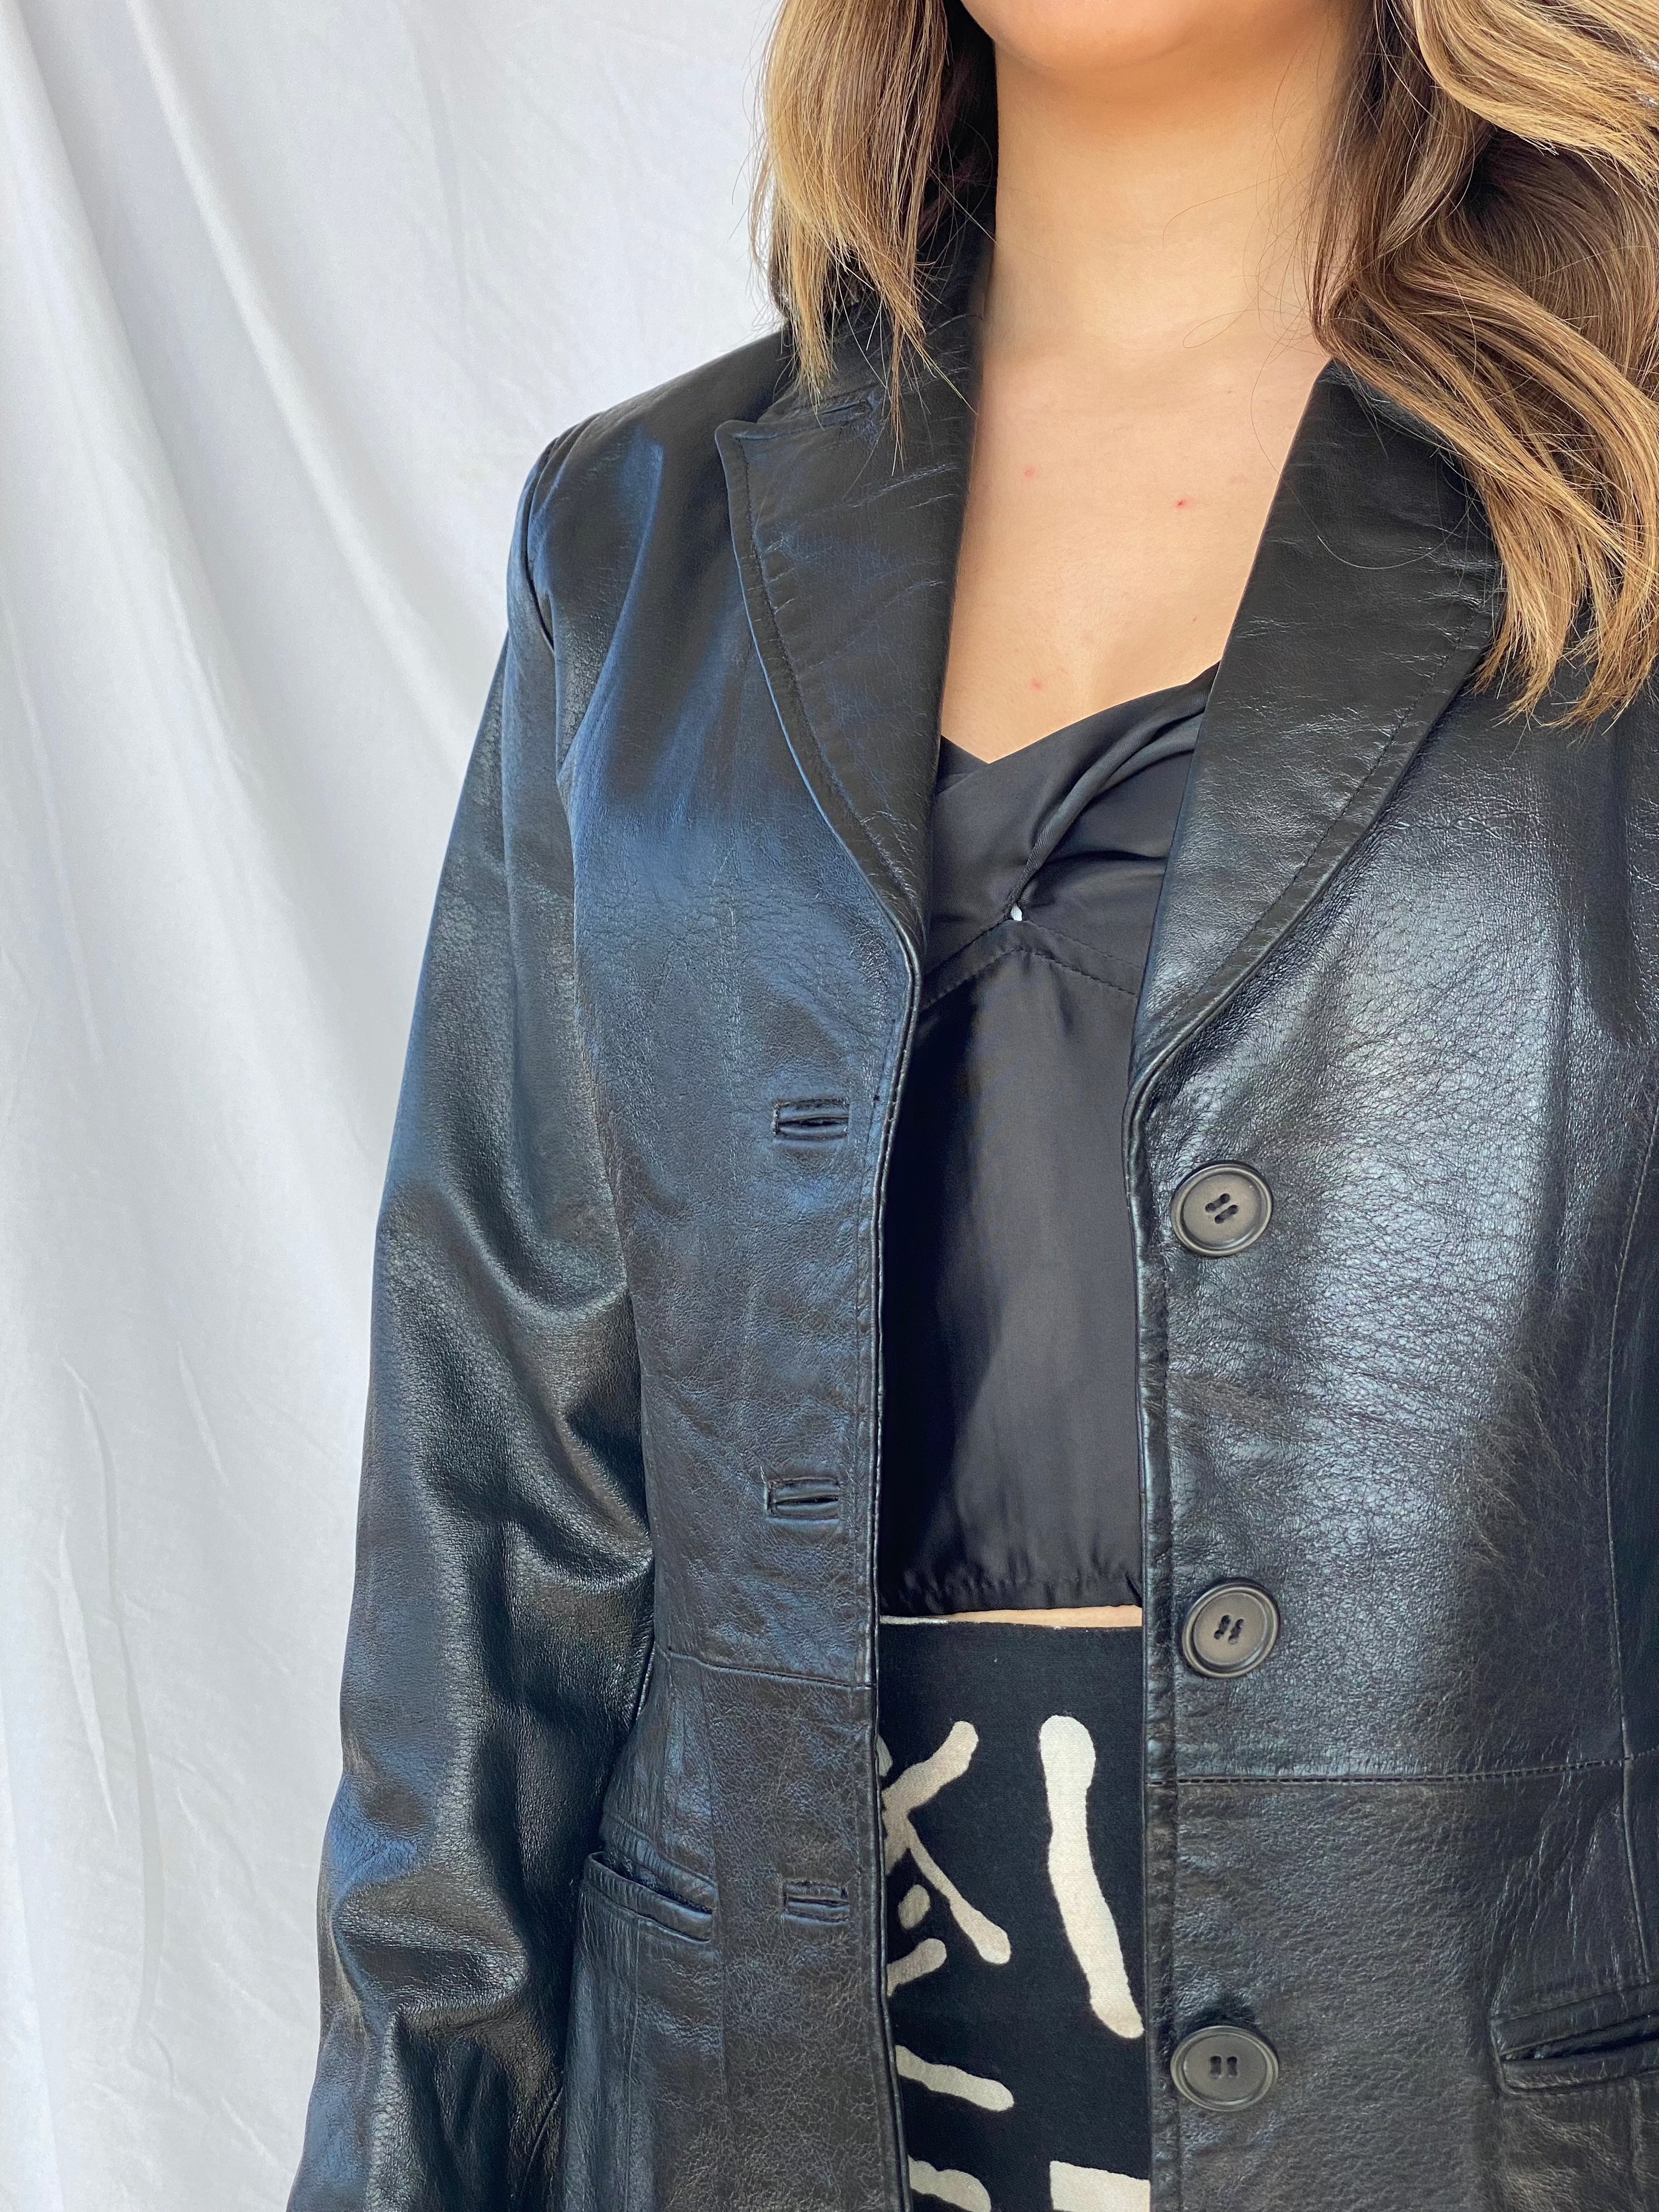 HENNES Collection Genuine Leather Jacket - Balagan Vintage Leather Jacket 90s, black leather, genuine leather, genuine leather jacket, leather, leather jacket, outerwear, vintage, vintage jacket